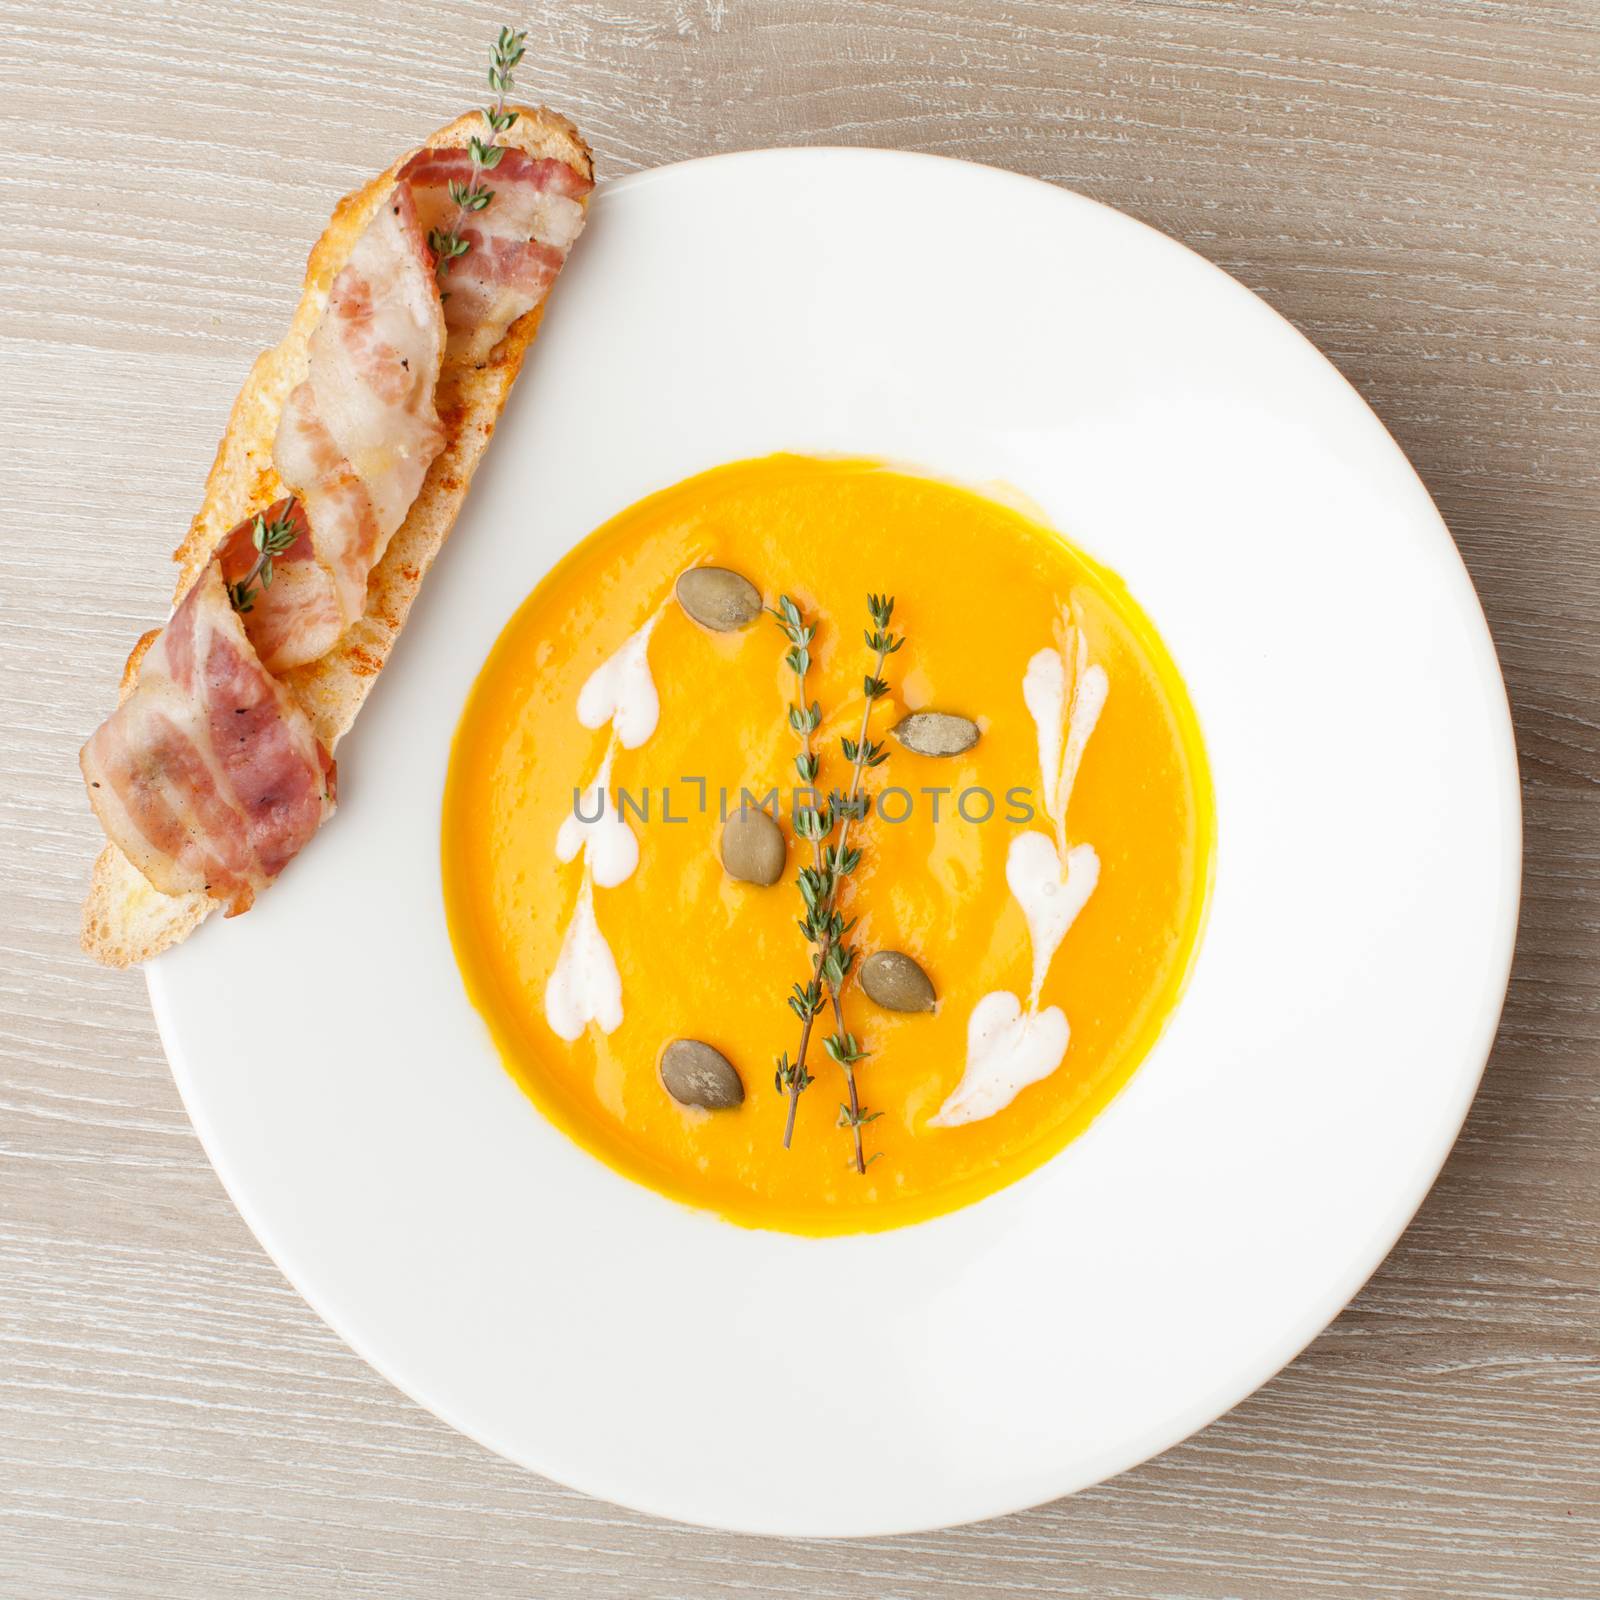 Pumpkin cream soup puree with ginger smack,  served in white plate , baked bread slice, bacon, seeds and  thyme